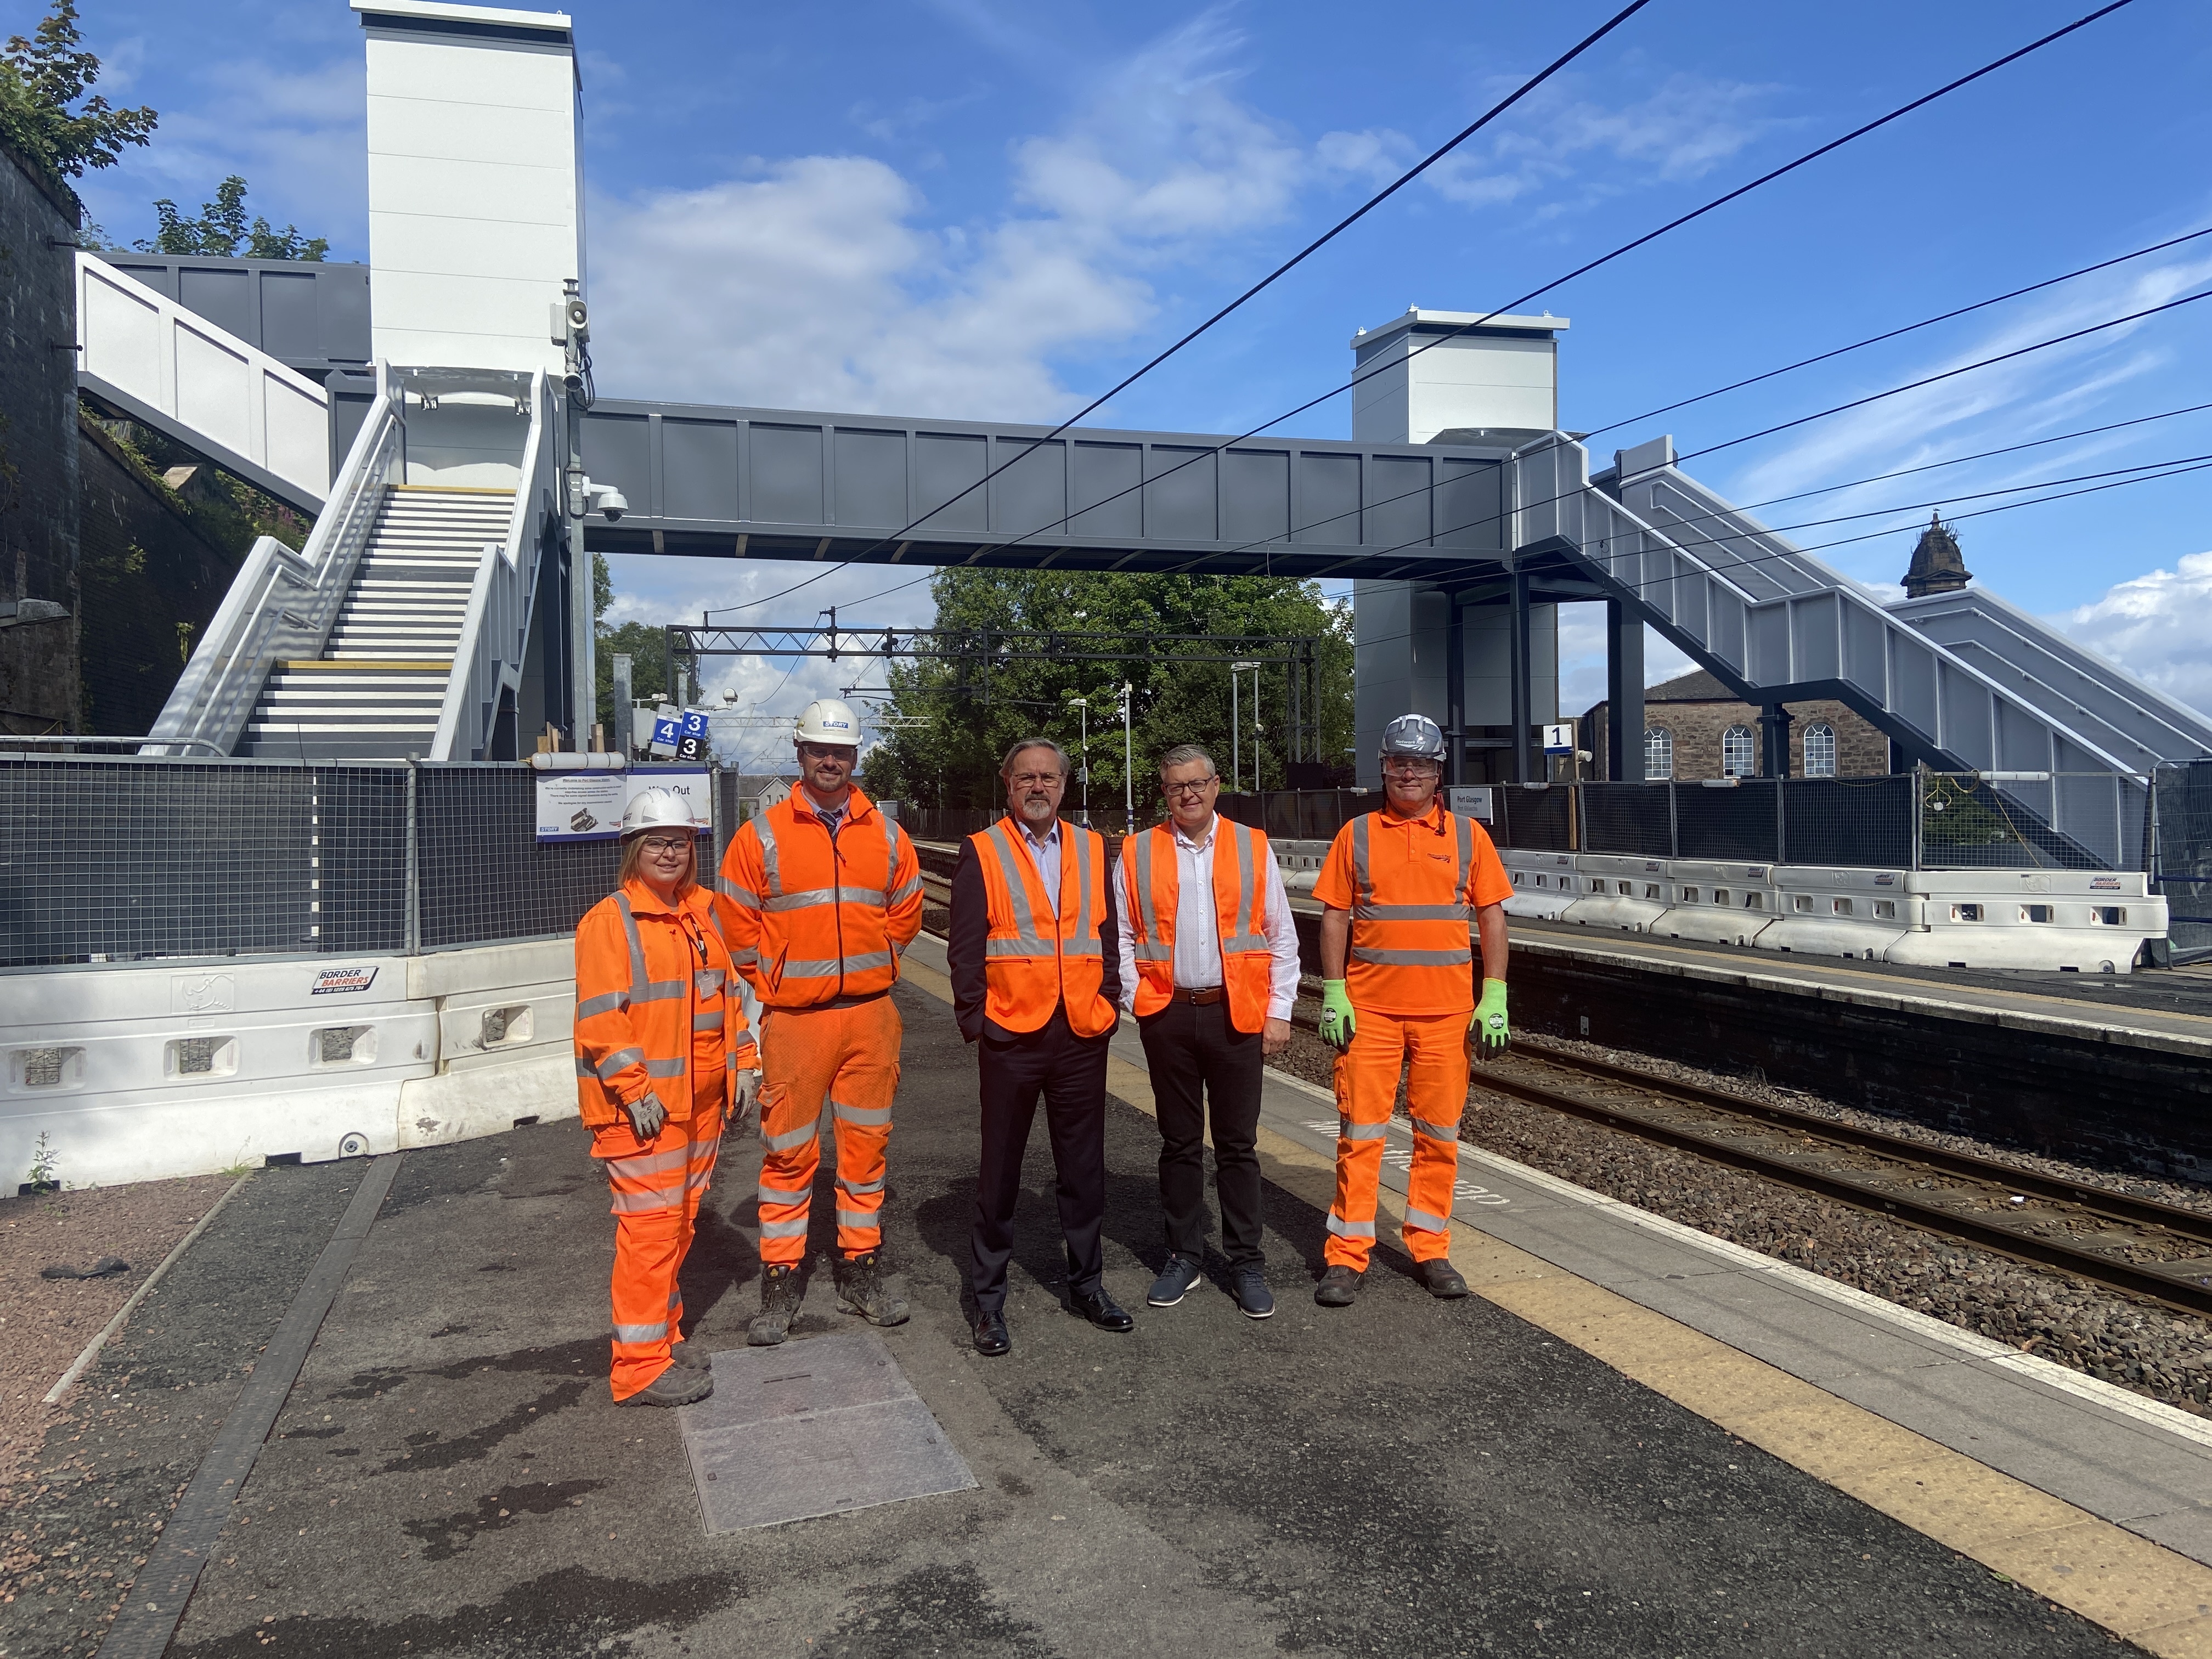 MP Ronnie Cowan MSP Stuart McMillian with Laura and Rod, Network Rail, and Paul, STORY, at Port Glasgow.jpeg